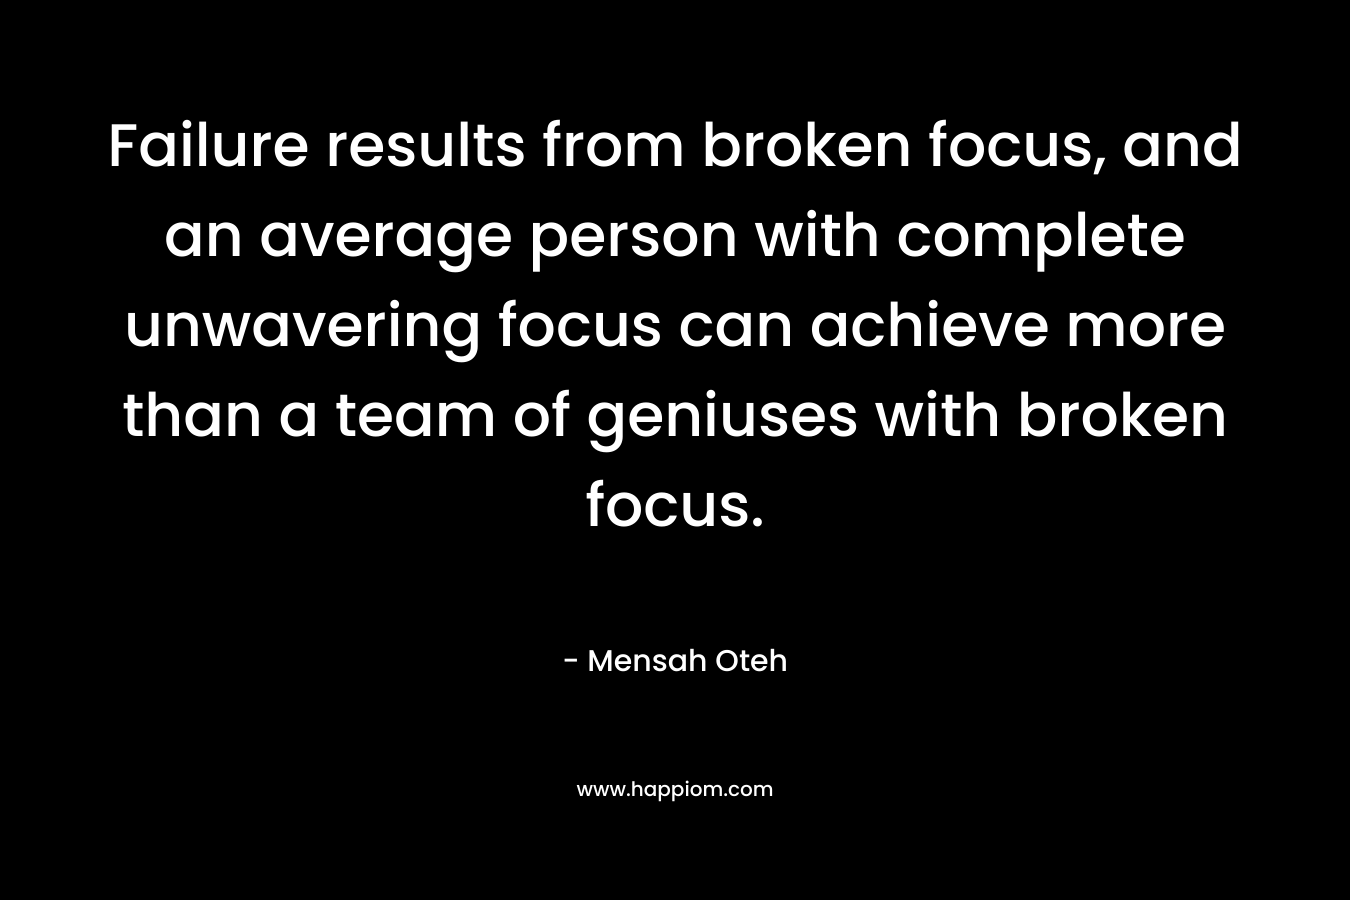 Failure results from broken focus, and an average person with complete unwavering focus can achieve more than a team of geniuses with broken focus. – Mensah Oteh